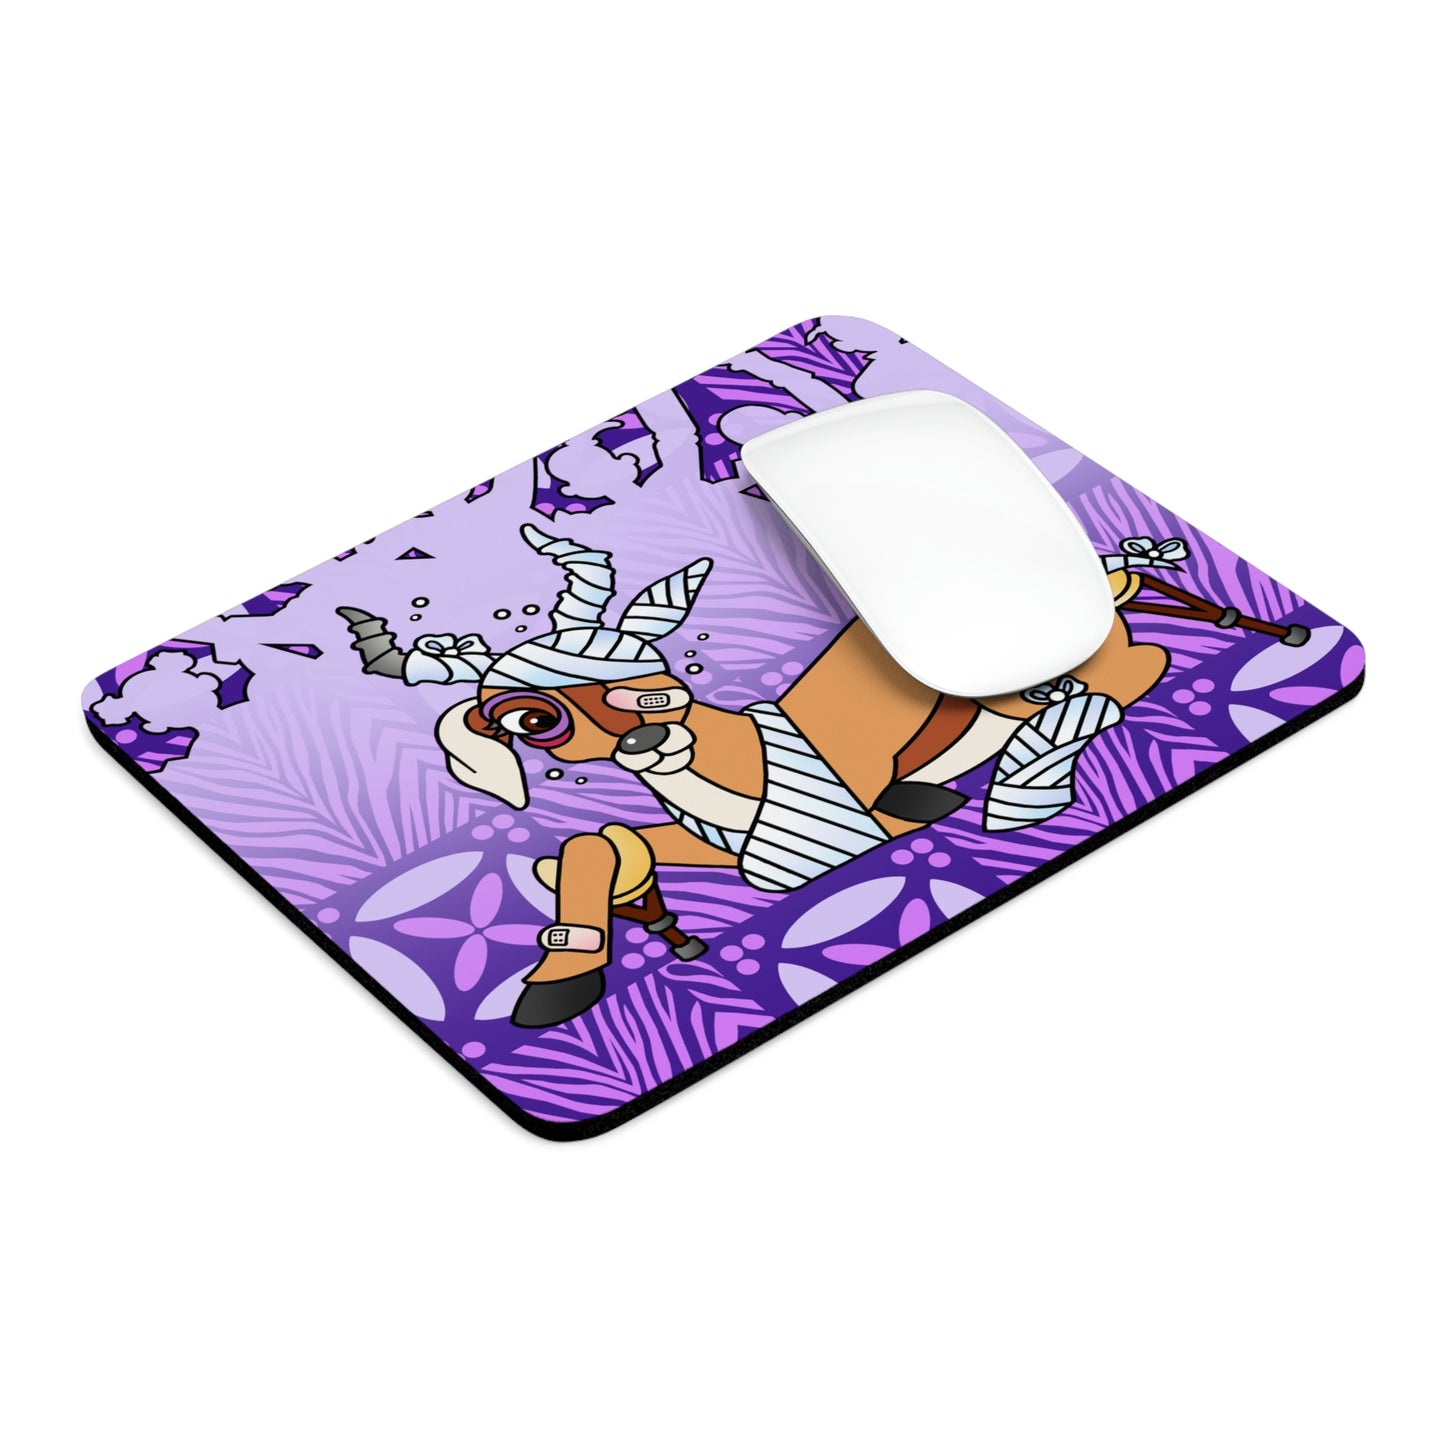 The Day that Goso Fell! Rectangle Mouse Pad